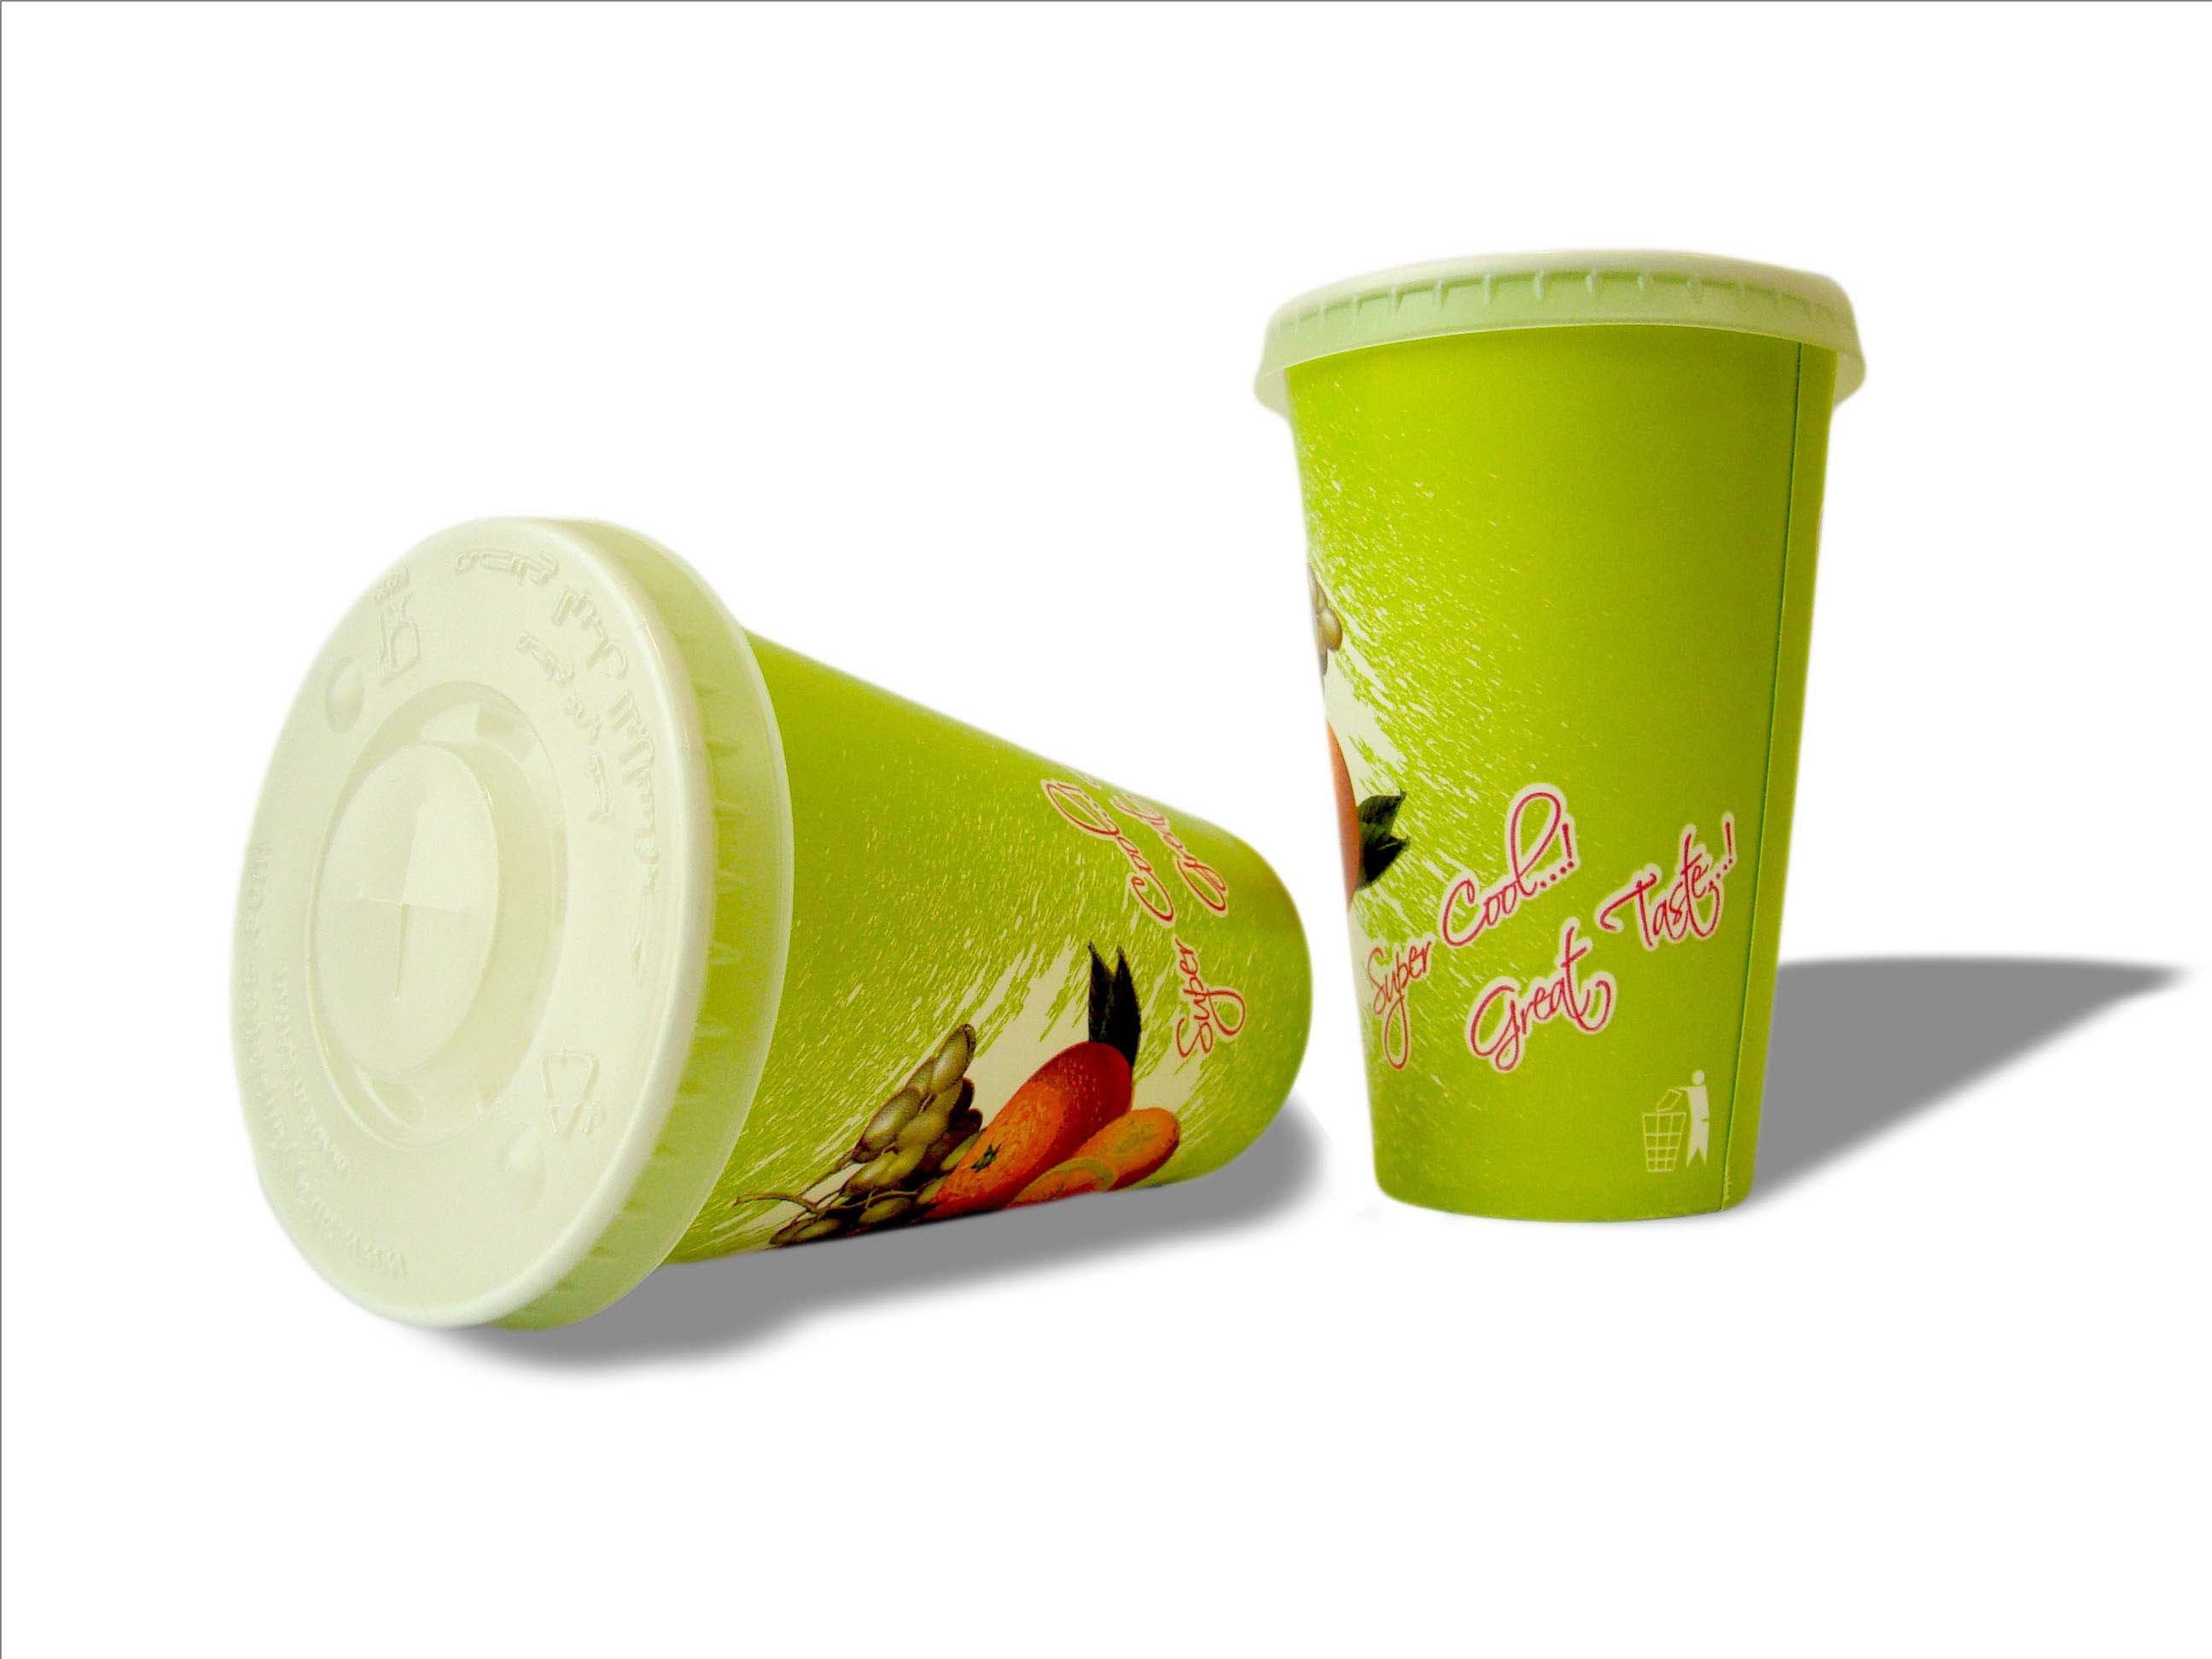 Royal Paper 12 oz. Imagination Print Kid's Cup with Lid and Straw - 250/Case